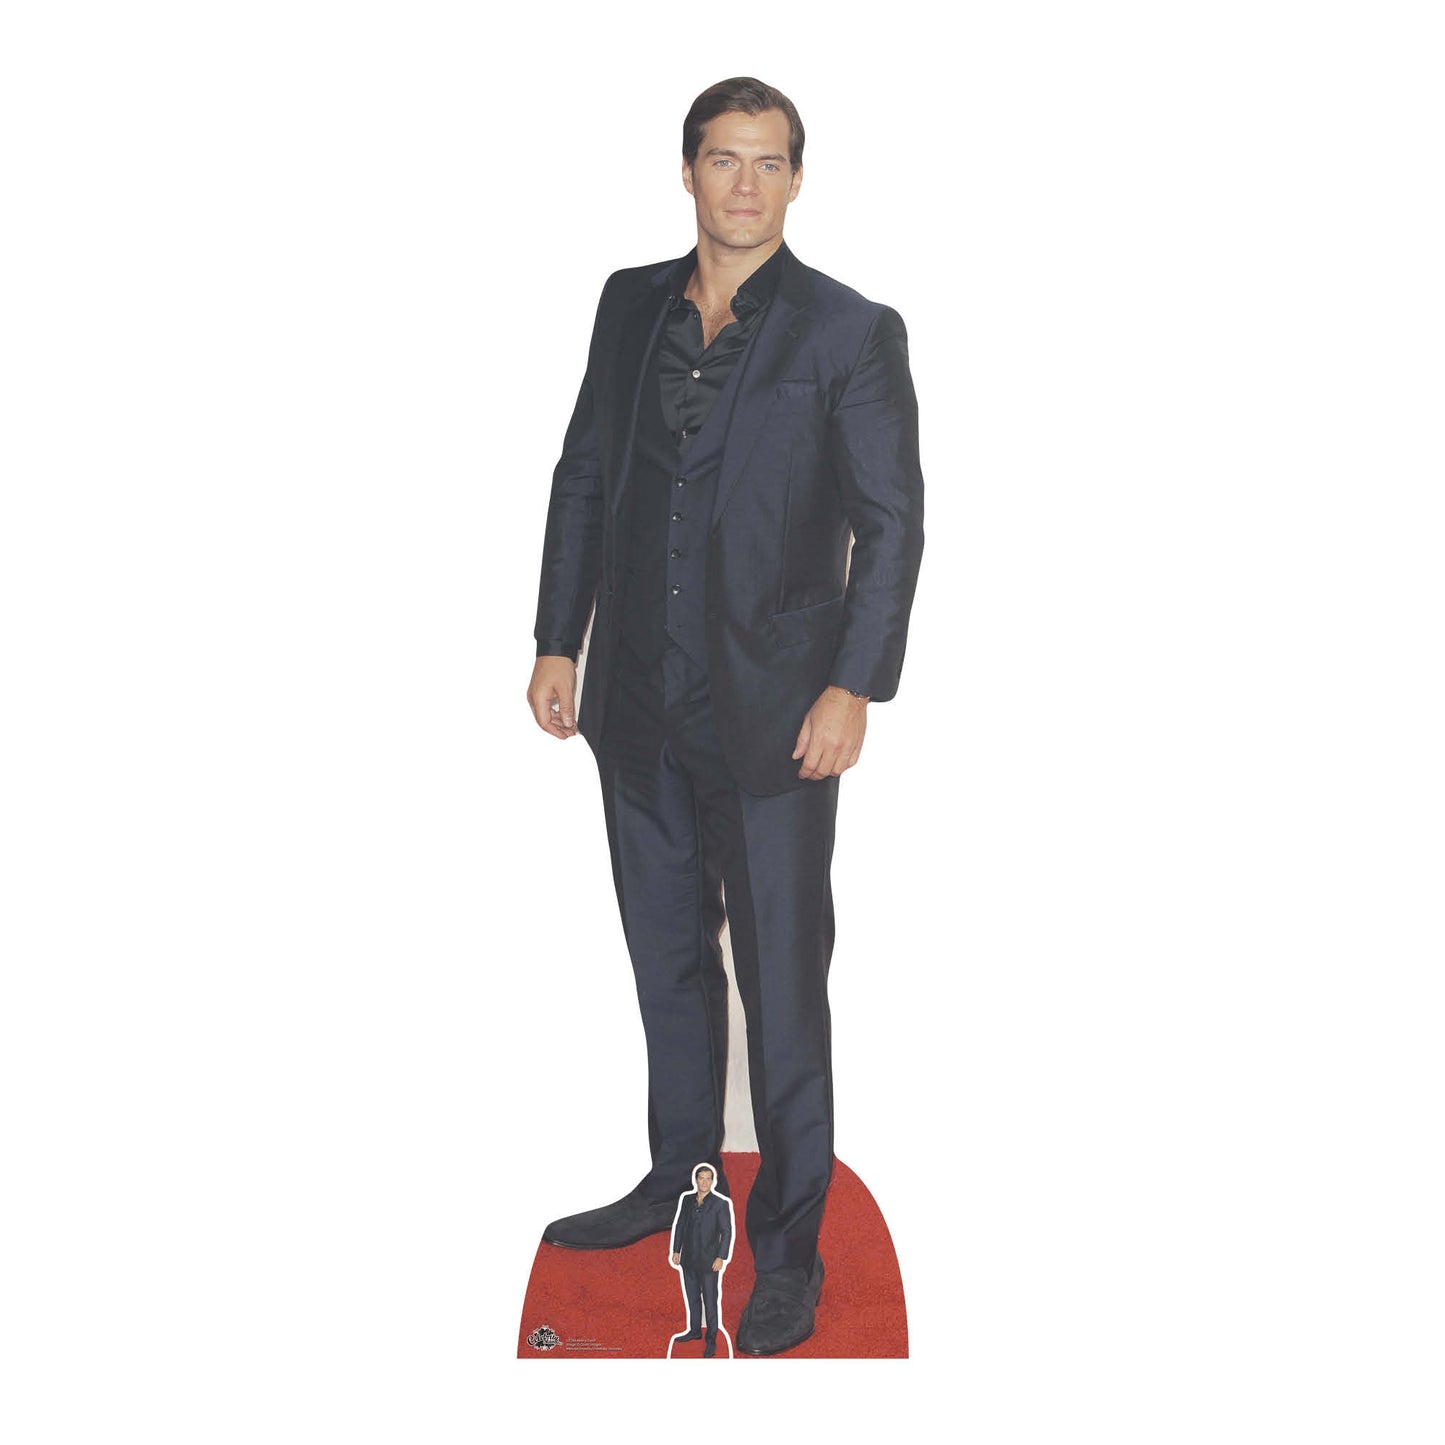 CS768 Henry Cavill Height 185cm Lifesize Cardboard Cut Out With Mini